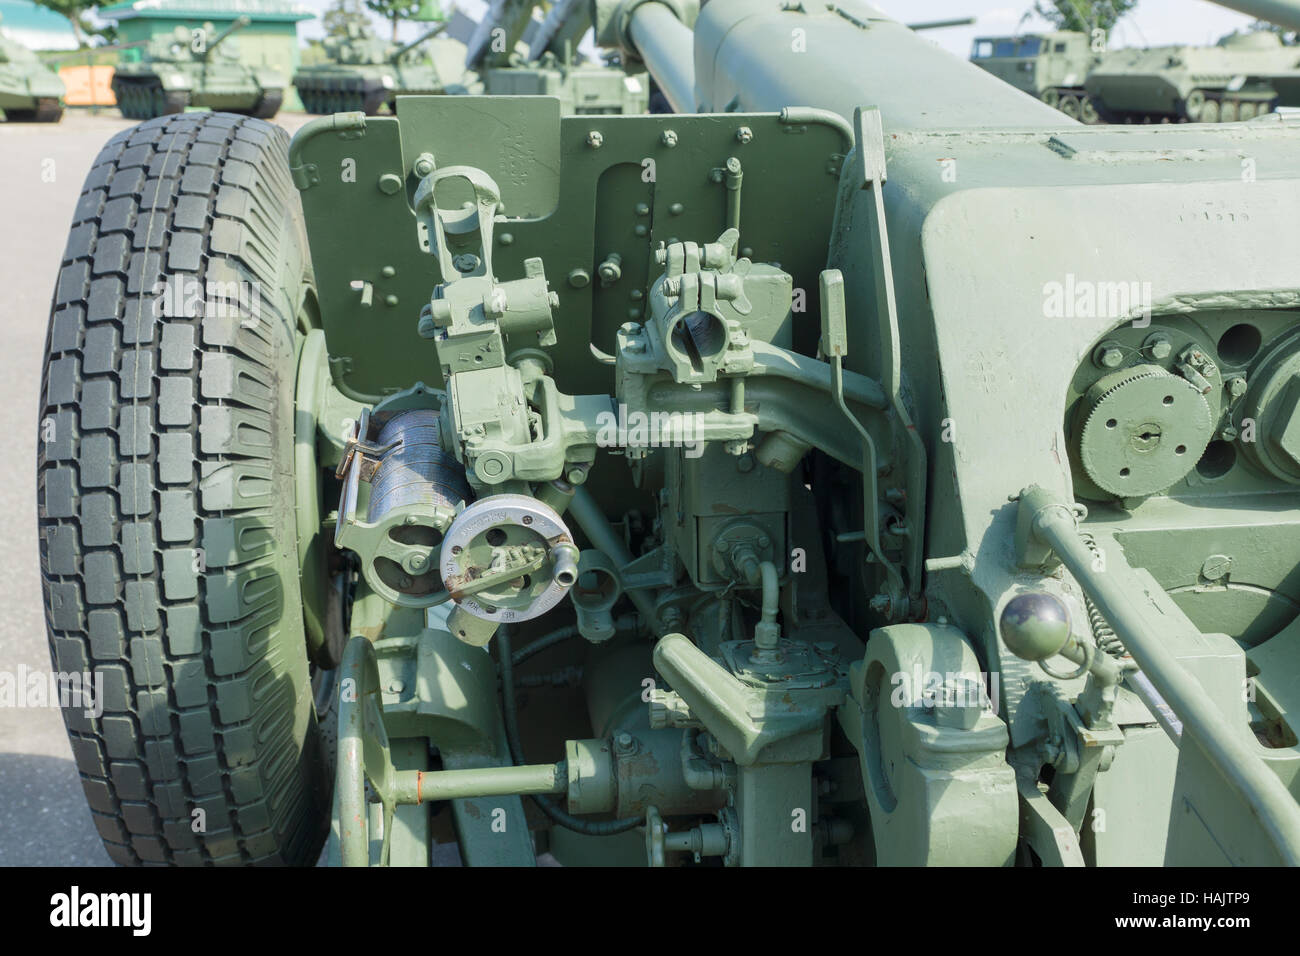 powerful military industry products are used for defense and attack Stock Photo